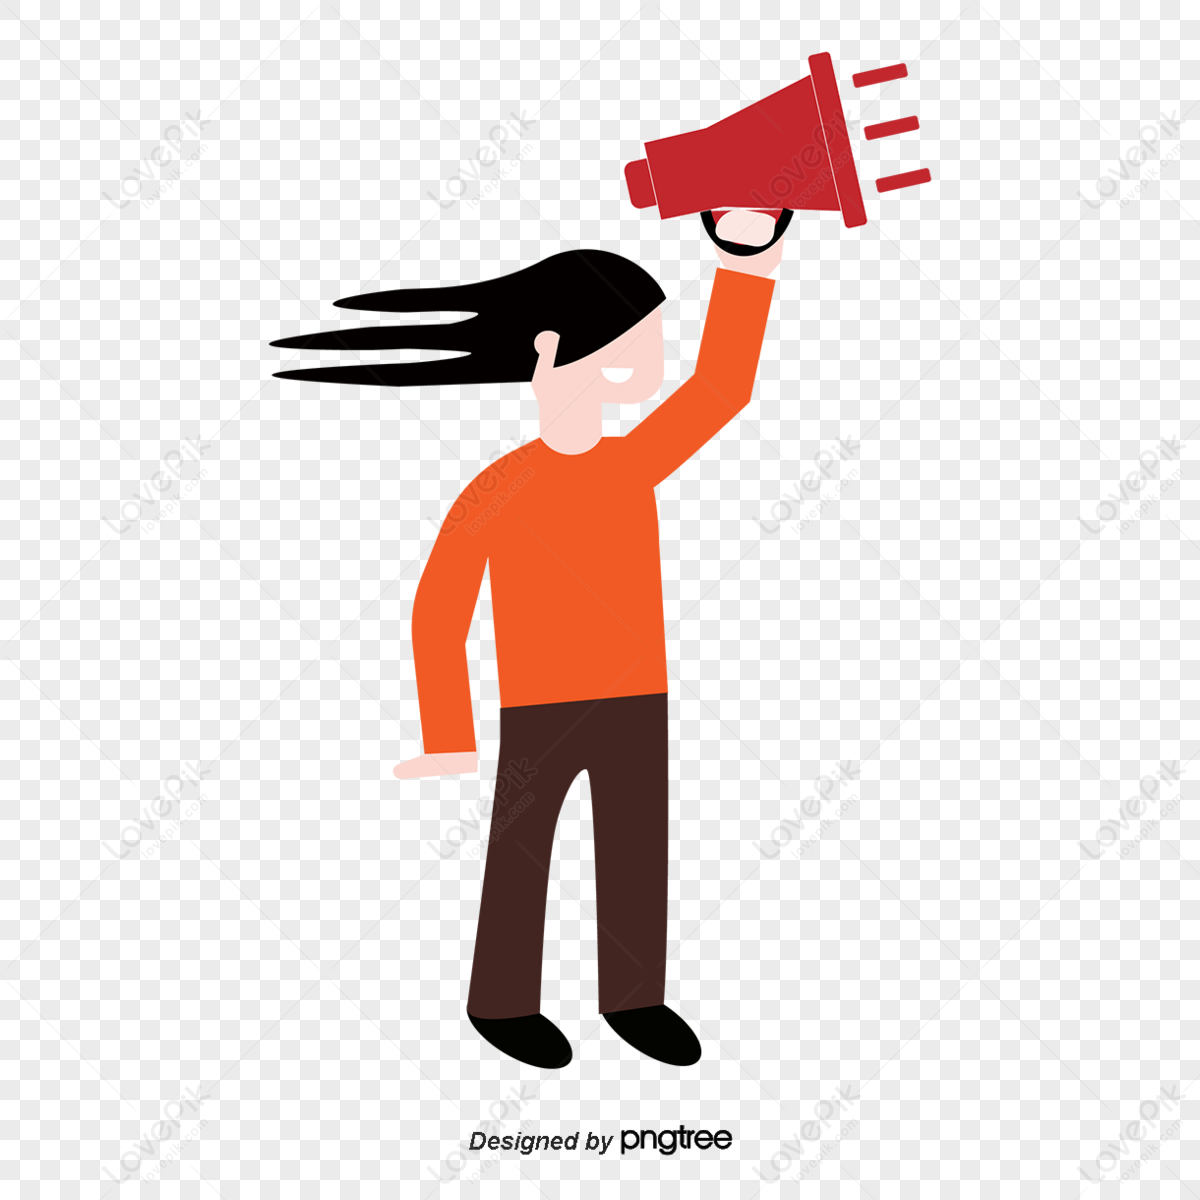 Megaphon Silhouette PNG And Vector Images Free Download - Pngtree